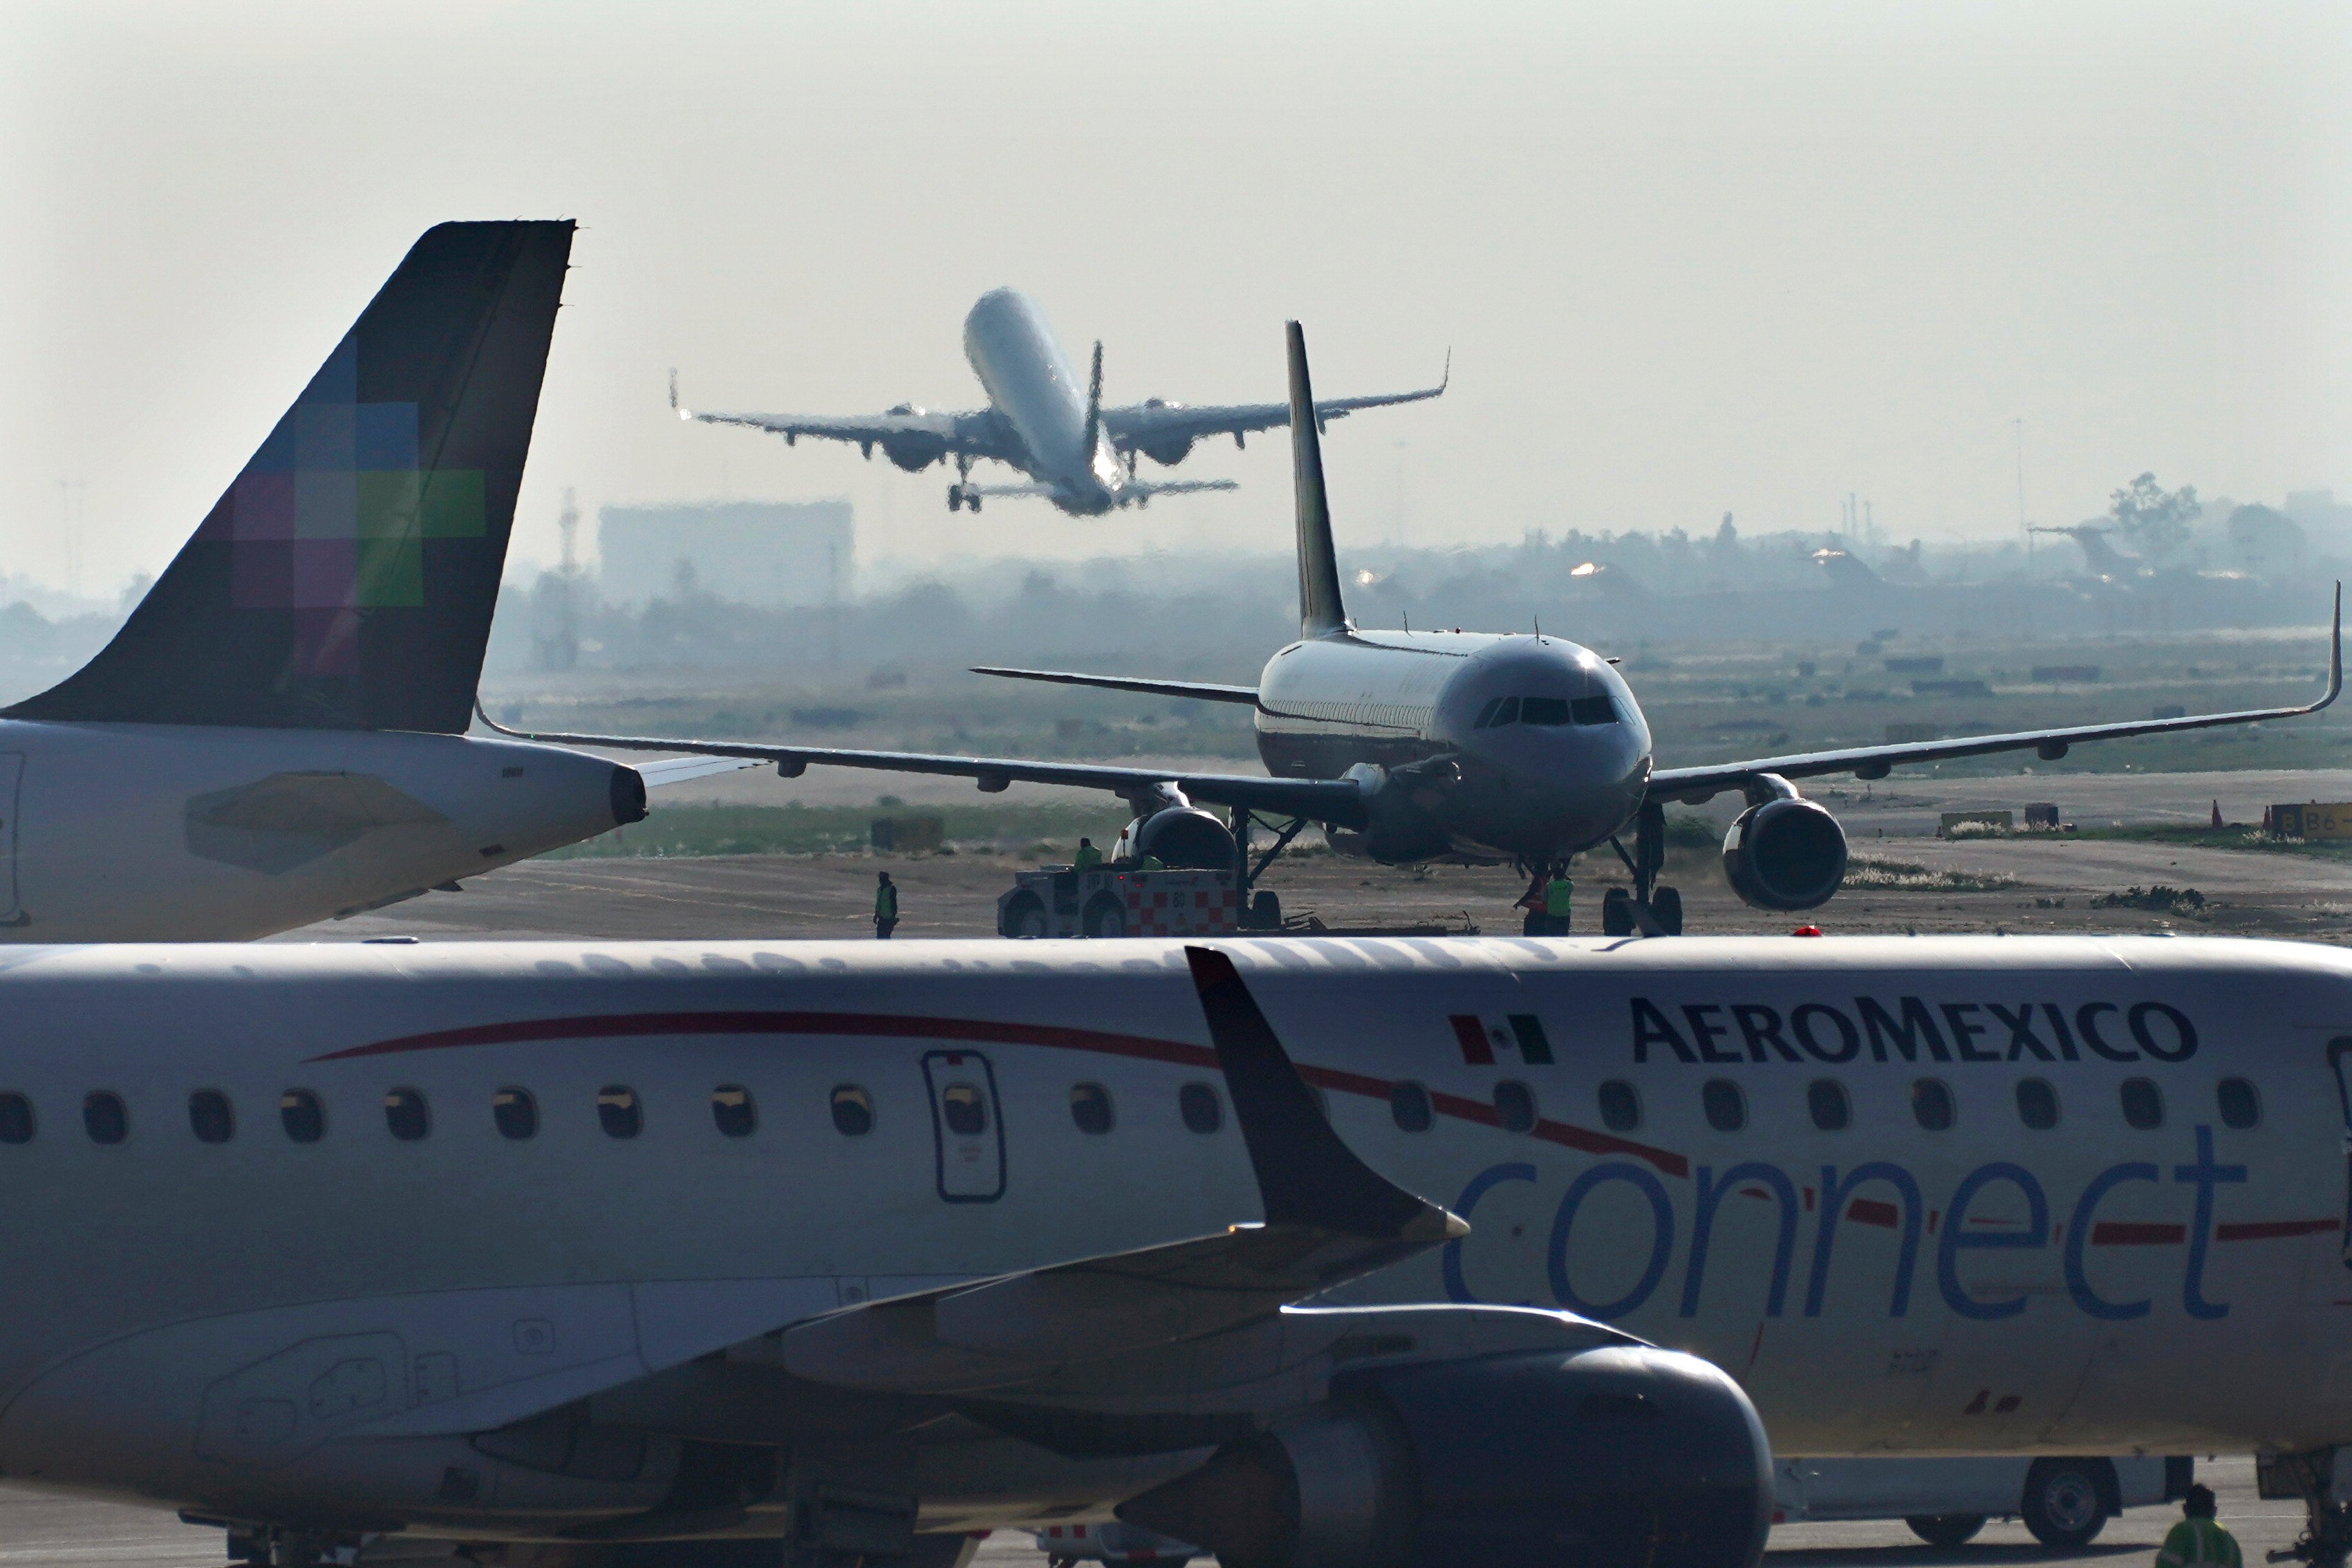 An Aeromexico plane taxis on the tarmac at Mexico City airport. File photo: AP